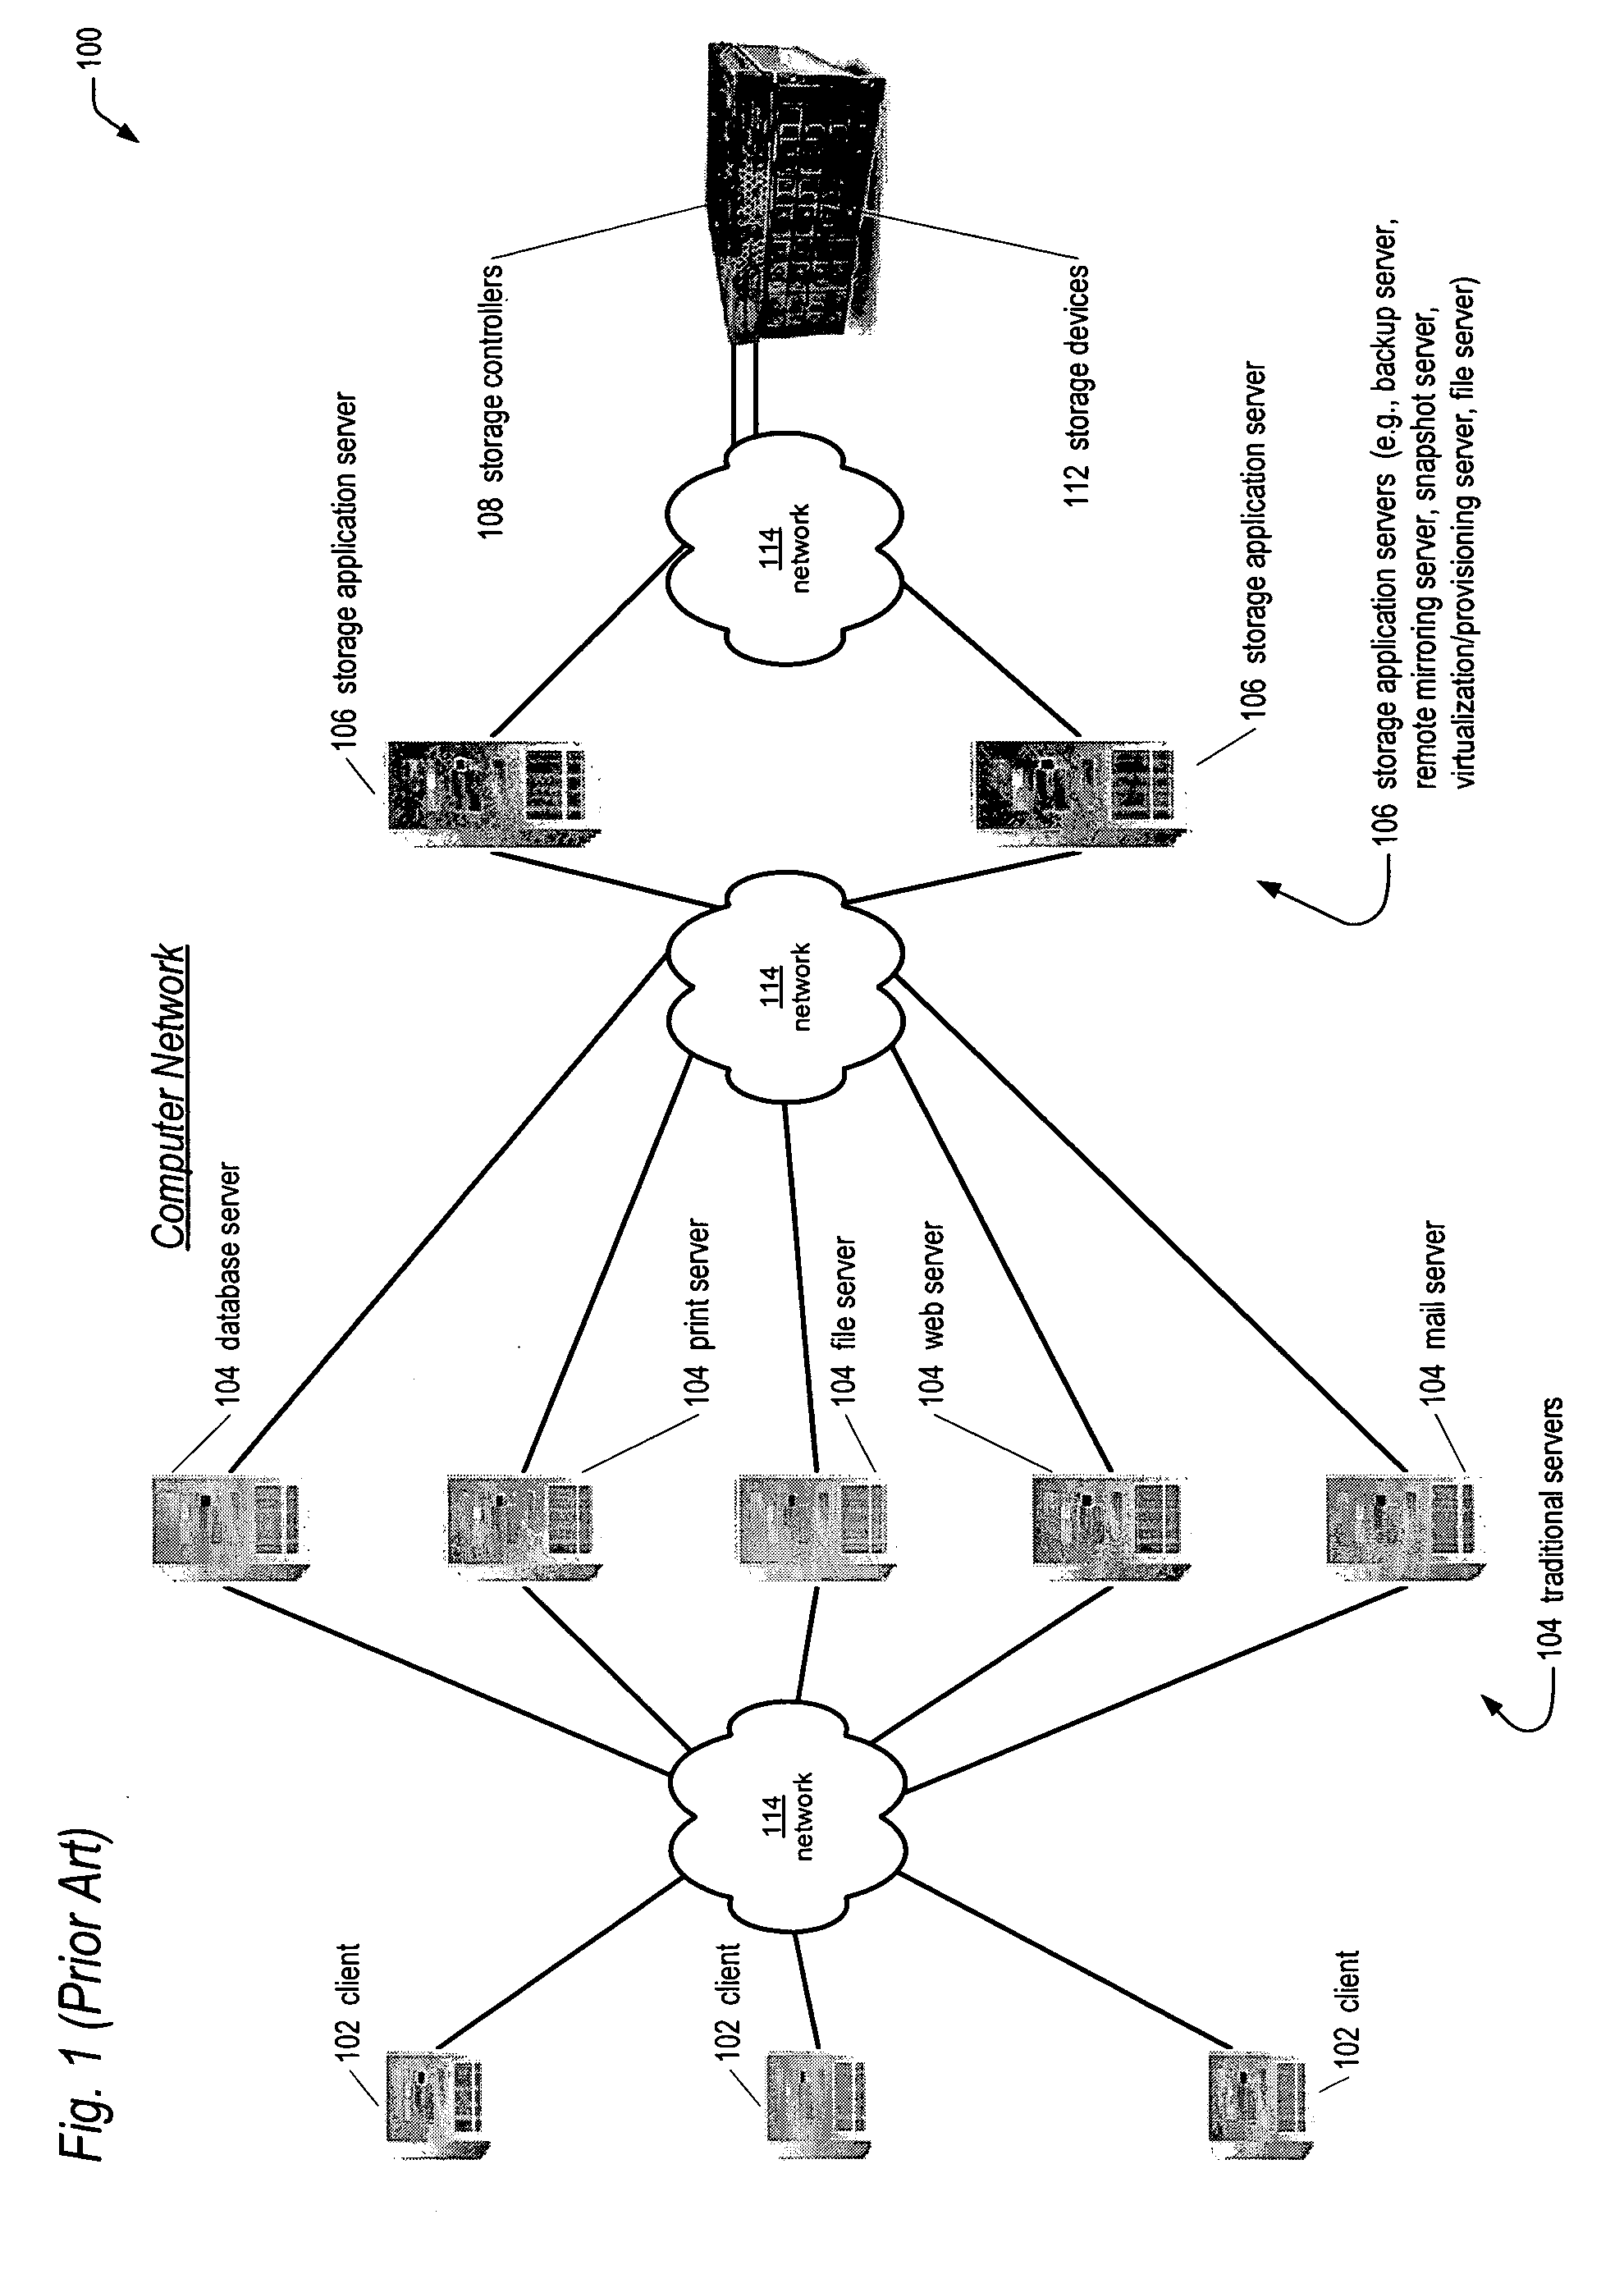 Network storage appliance with an integrated switch